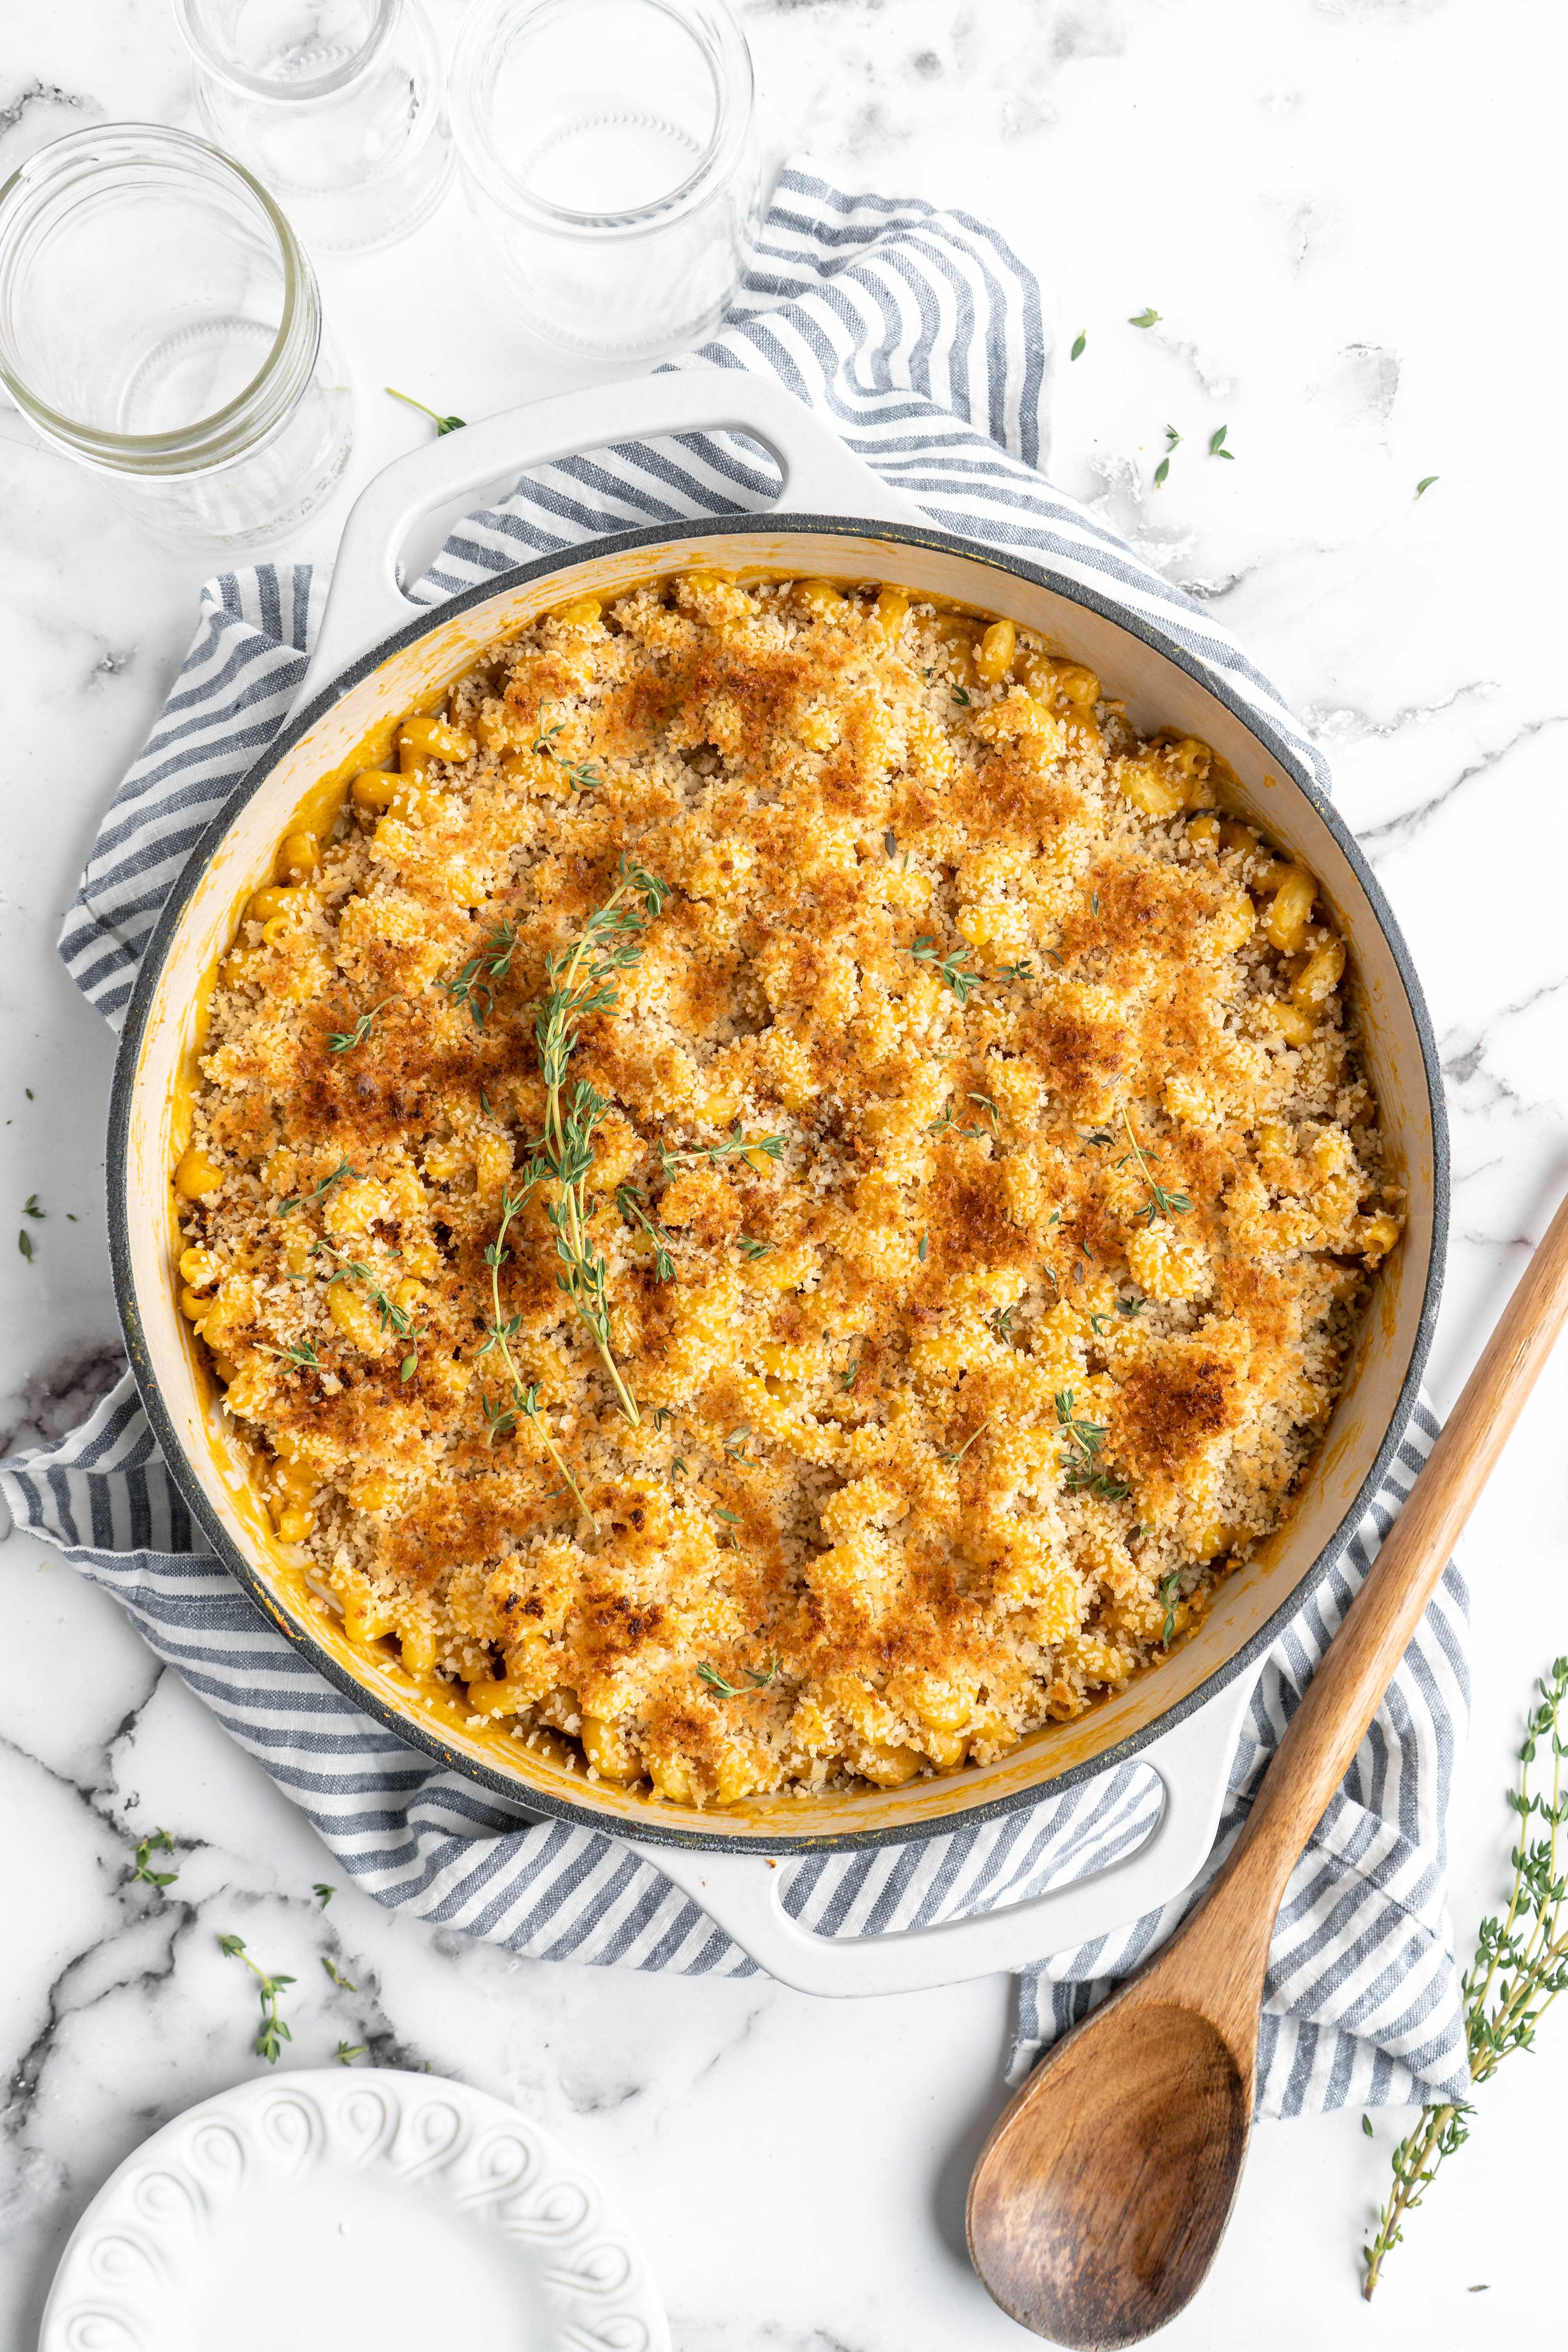 Vegan baked mac and cheese in pan, garnished with thyme sprigs